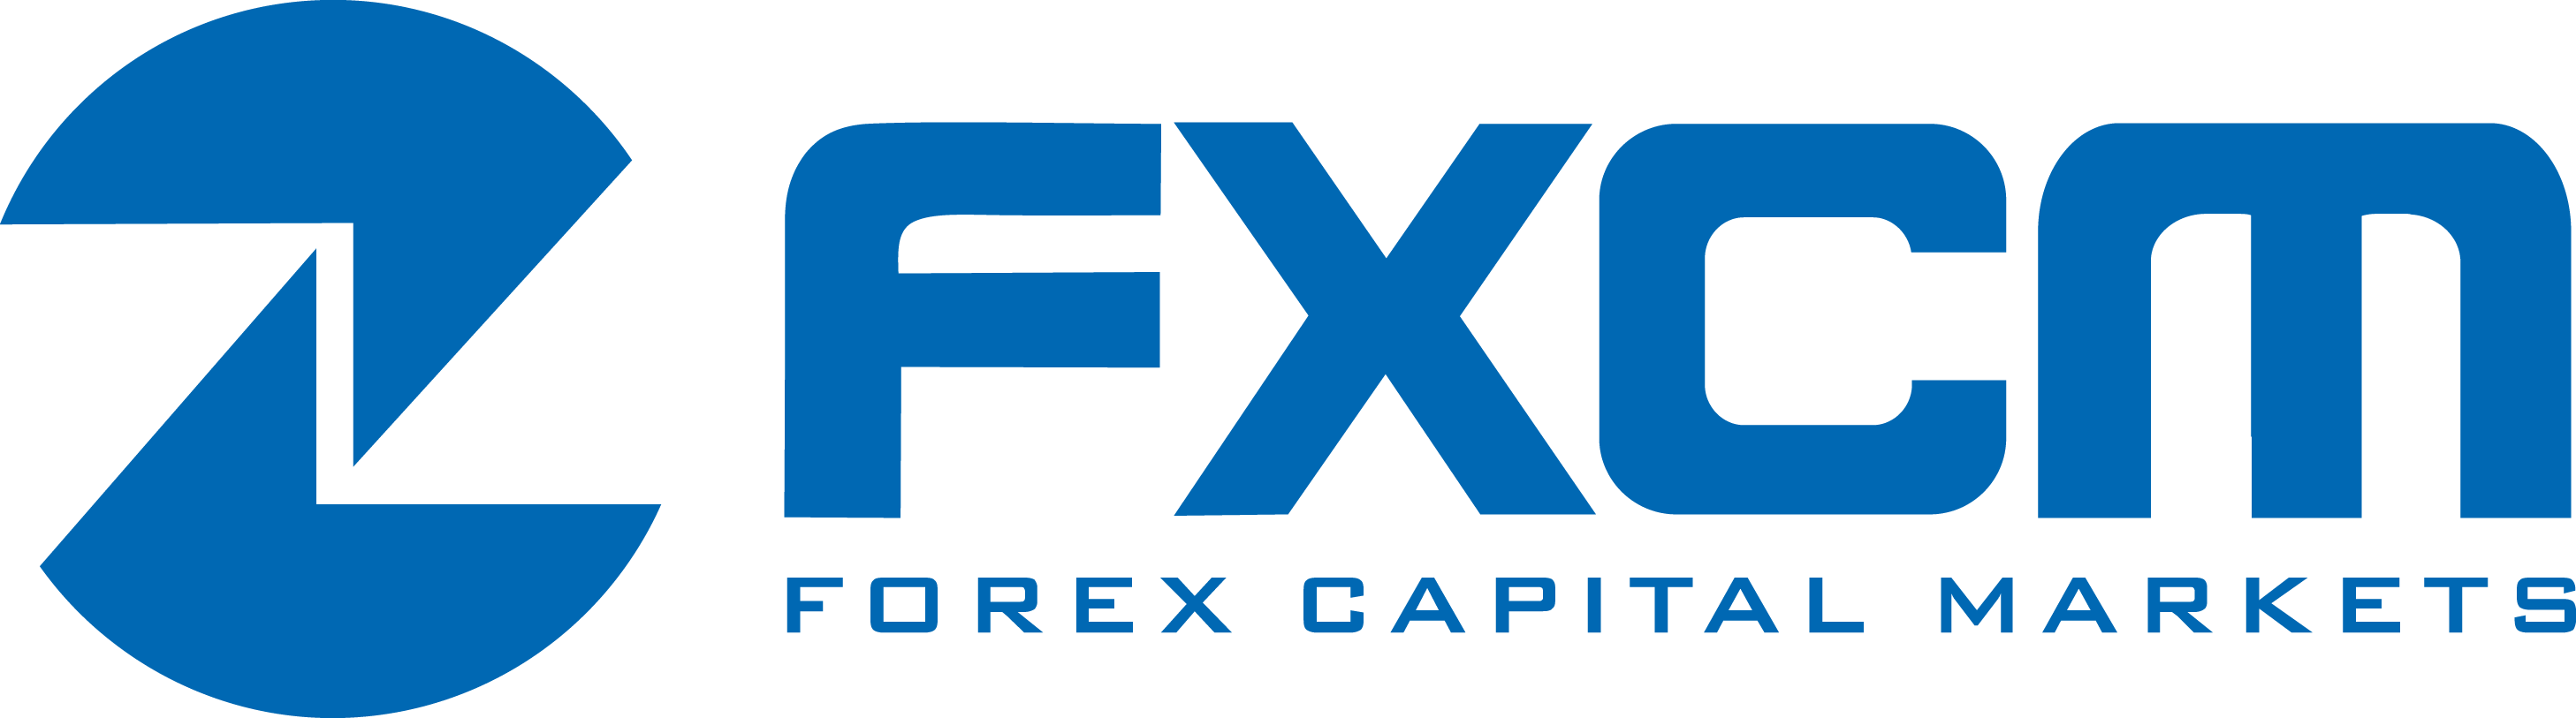 Largest forex